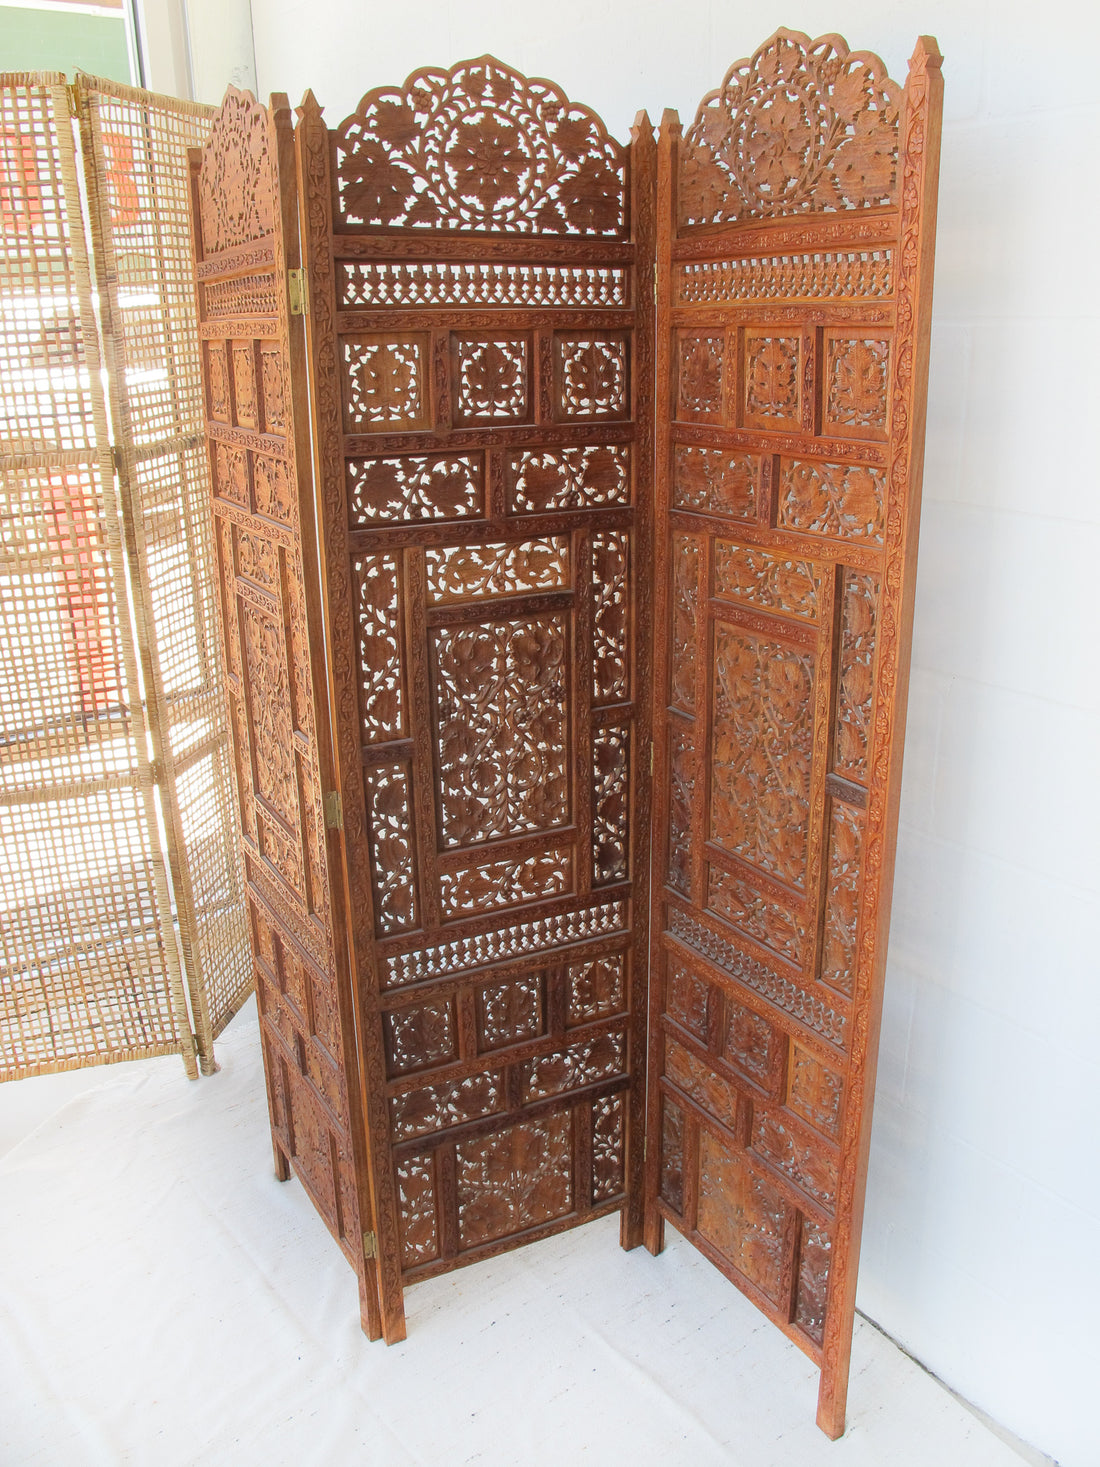 Vintage Three Panel Teak Rosewood Room Divider Privacy Screen - Made in India 1950's